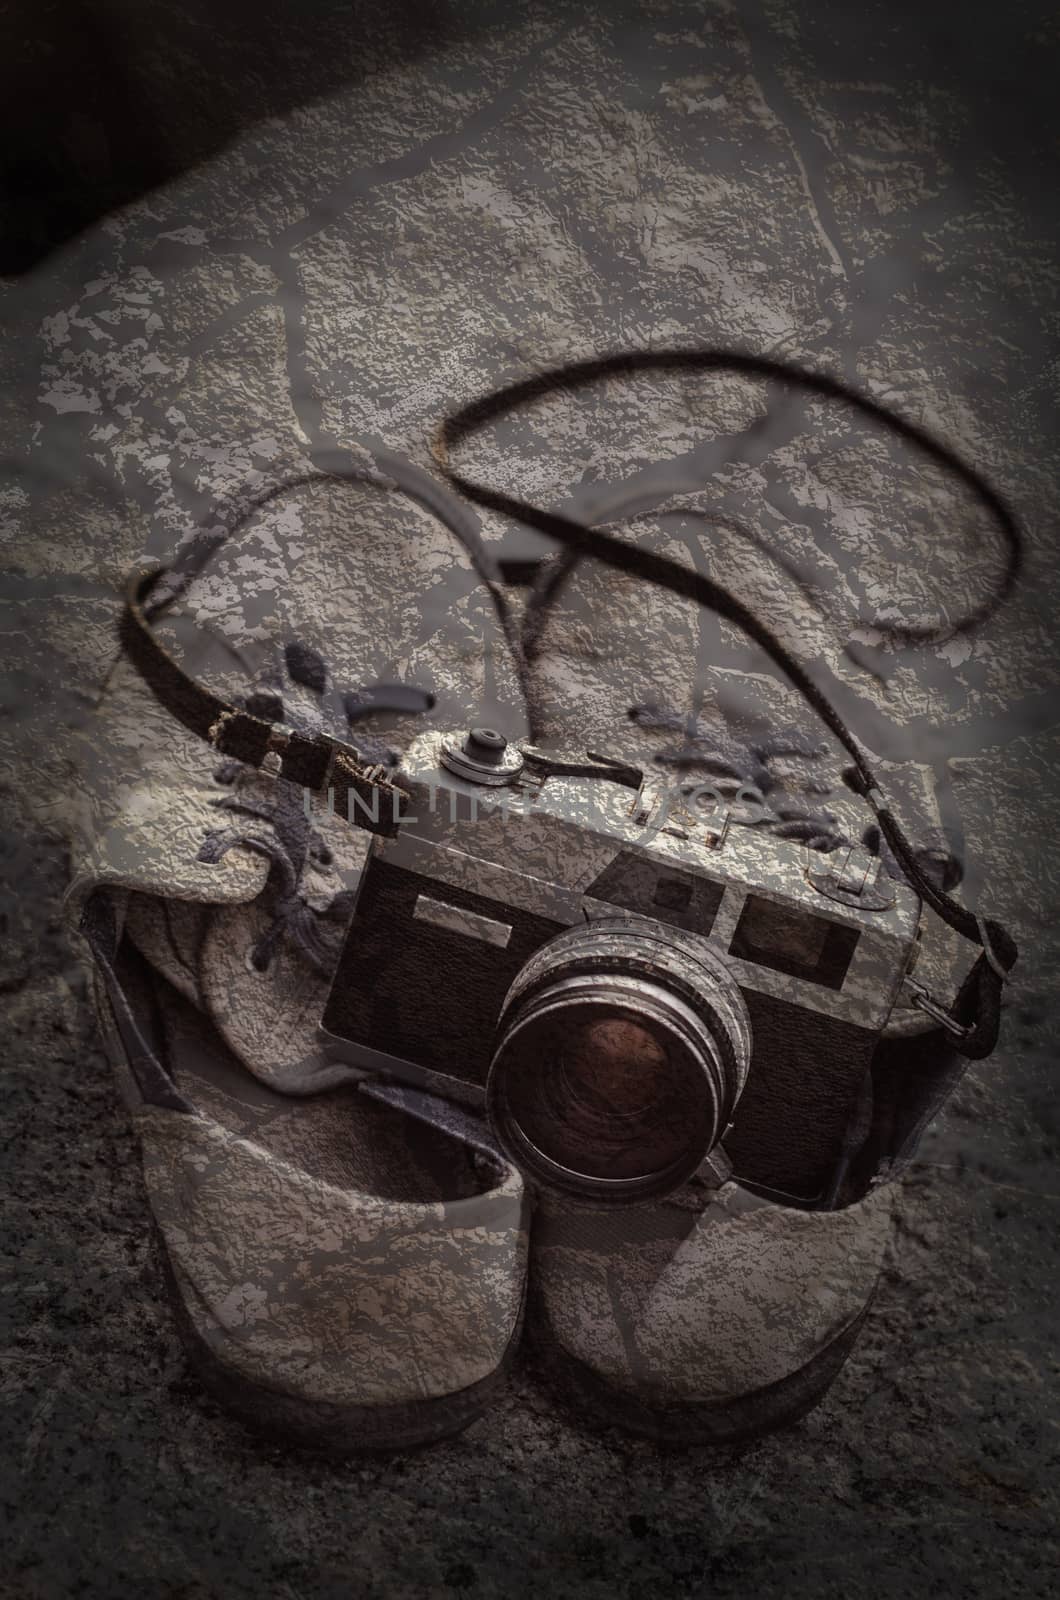 Vintage film camera on shoes with texture overlay  by pixbox77